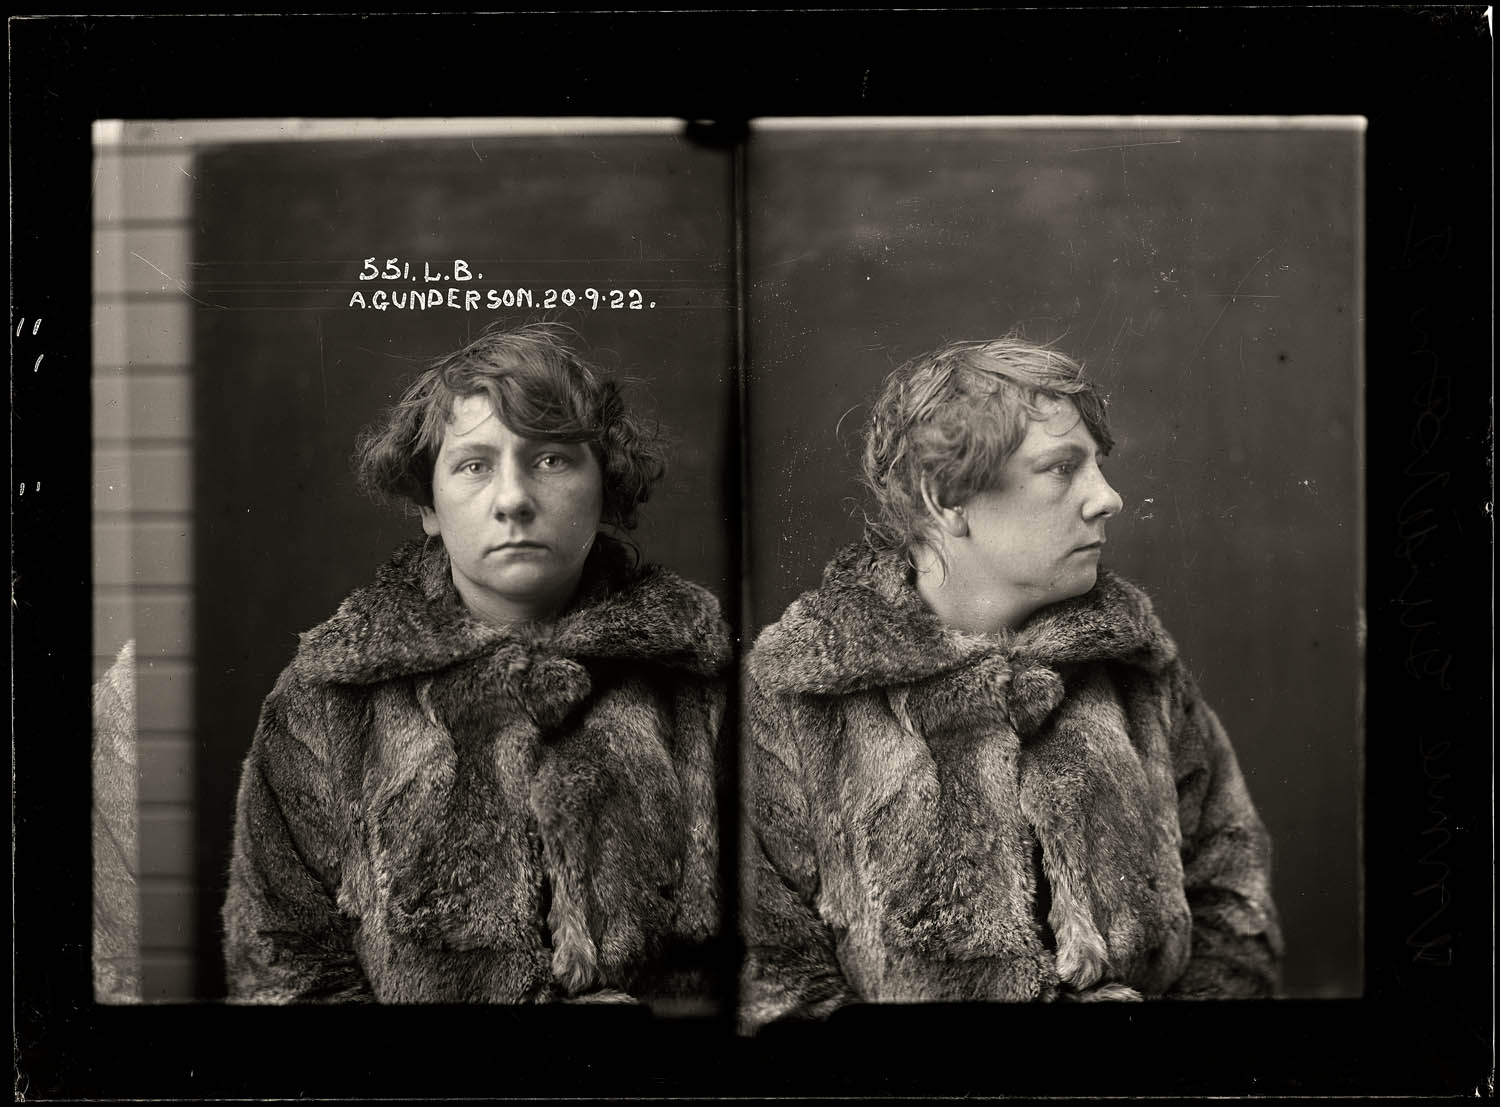 Annie Gunderson, criminal record number 551LB, 20 September 1922. State Reformatory for Women, Long Bay, NSW 